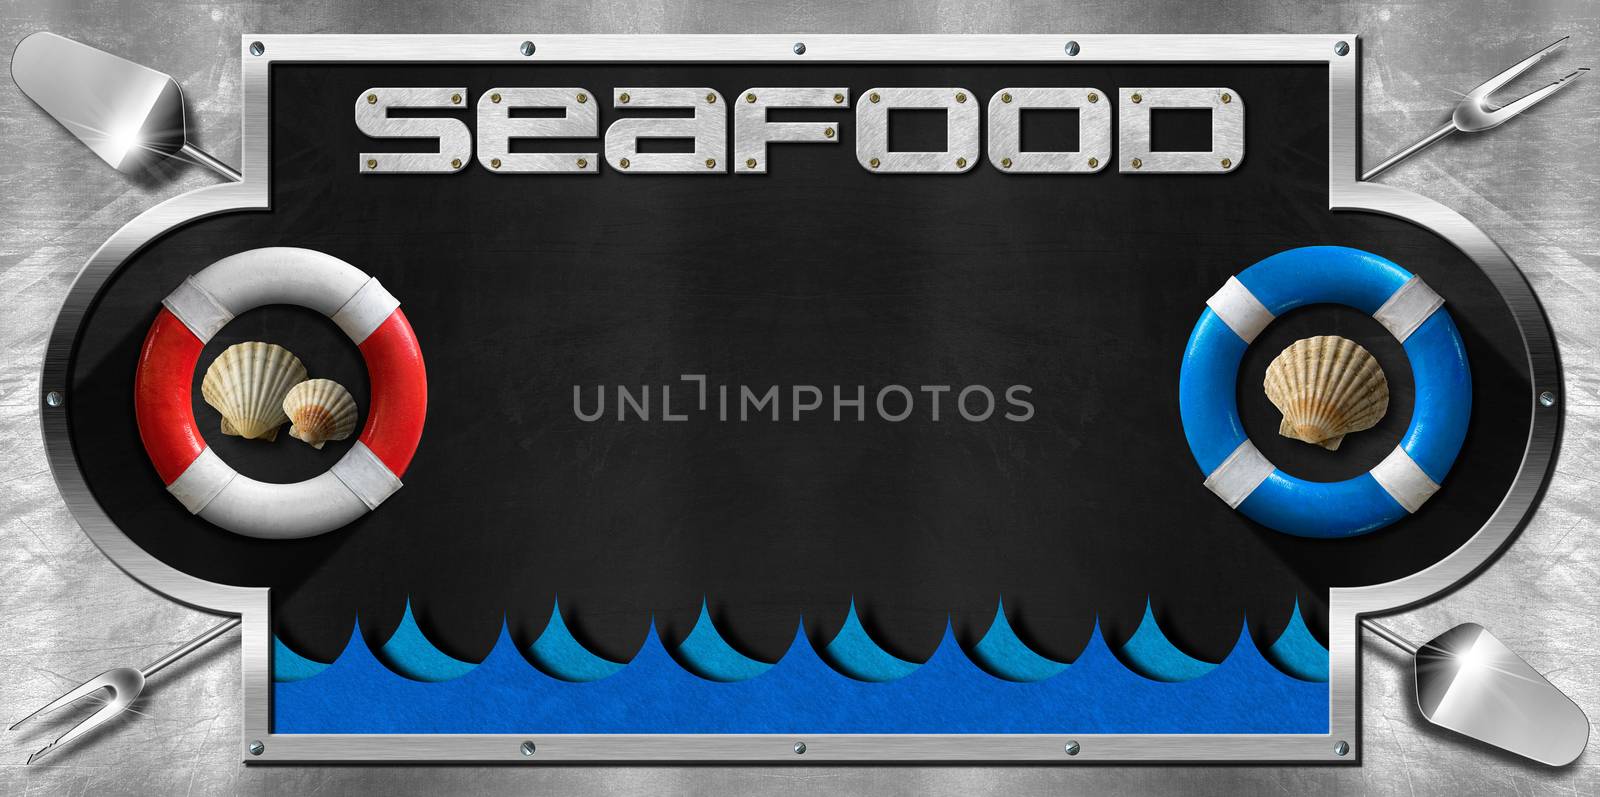 Blackboard with a metal frame on a metallic background with kitchen utensils, lifebuoys, seashells and sea waves. Template for recipes or seafood menu